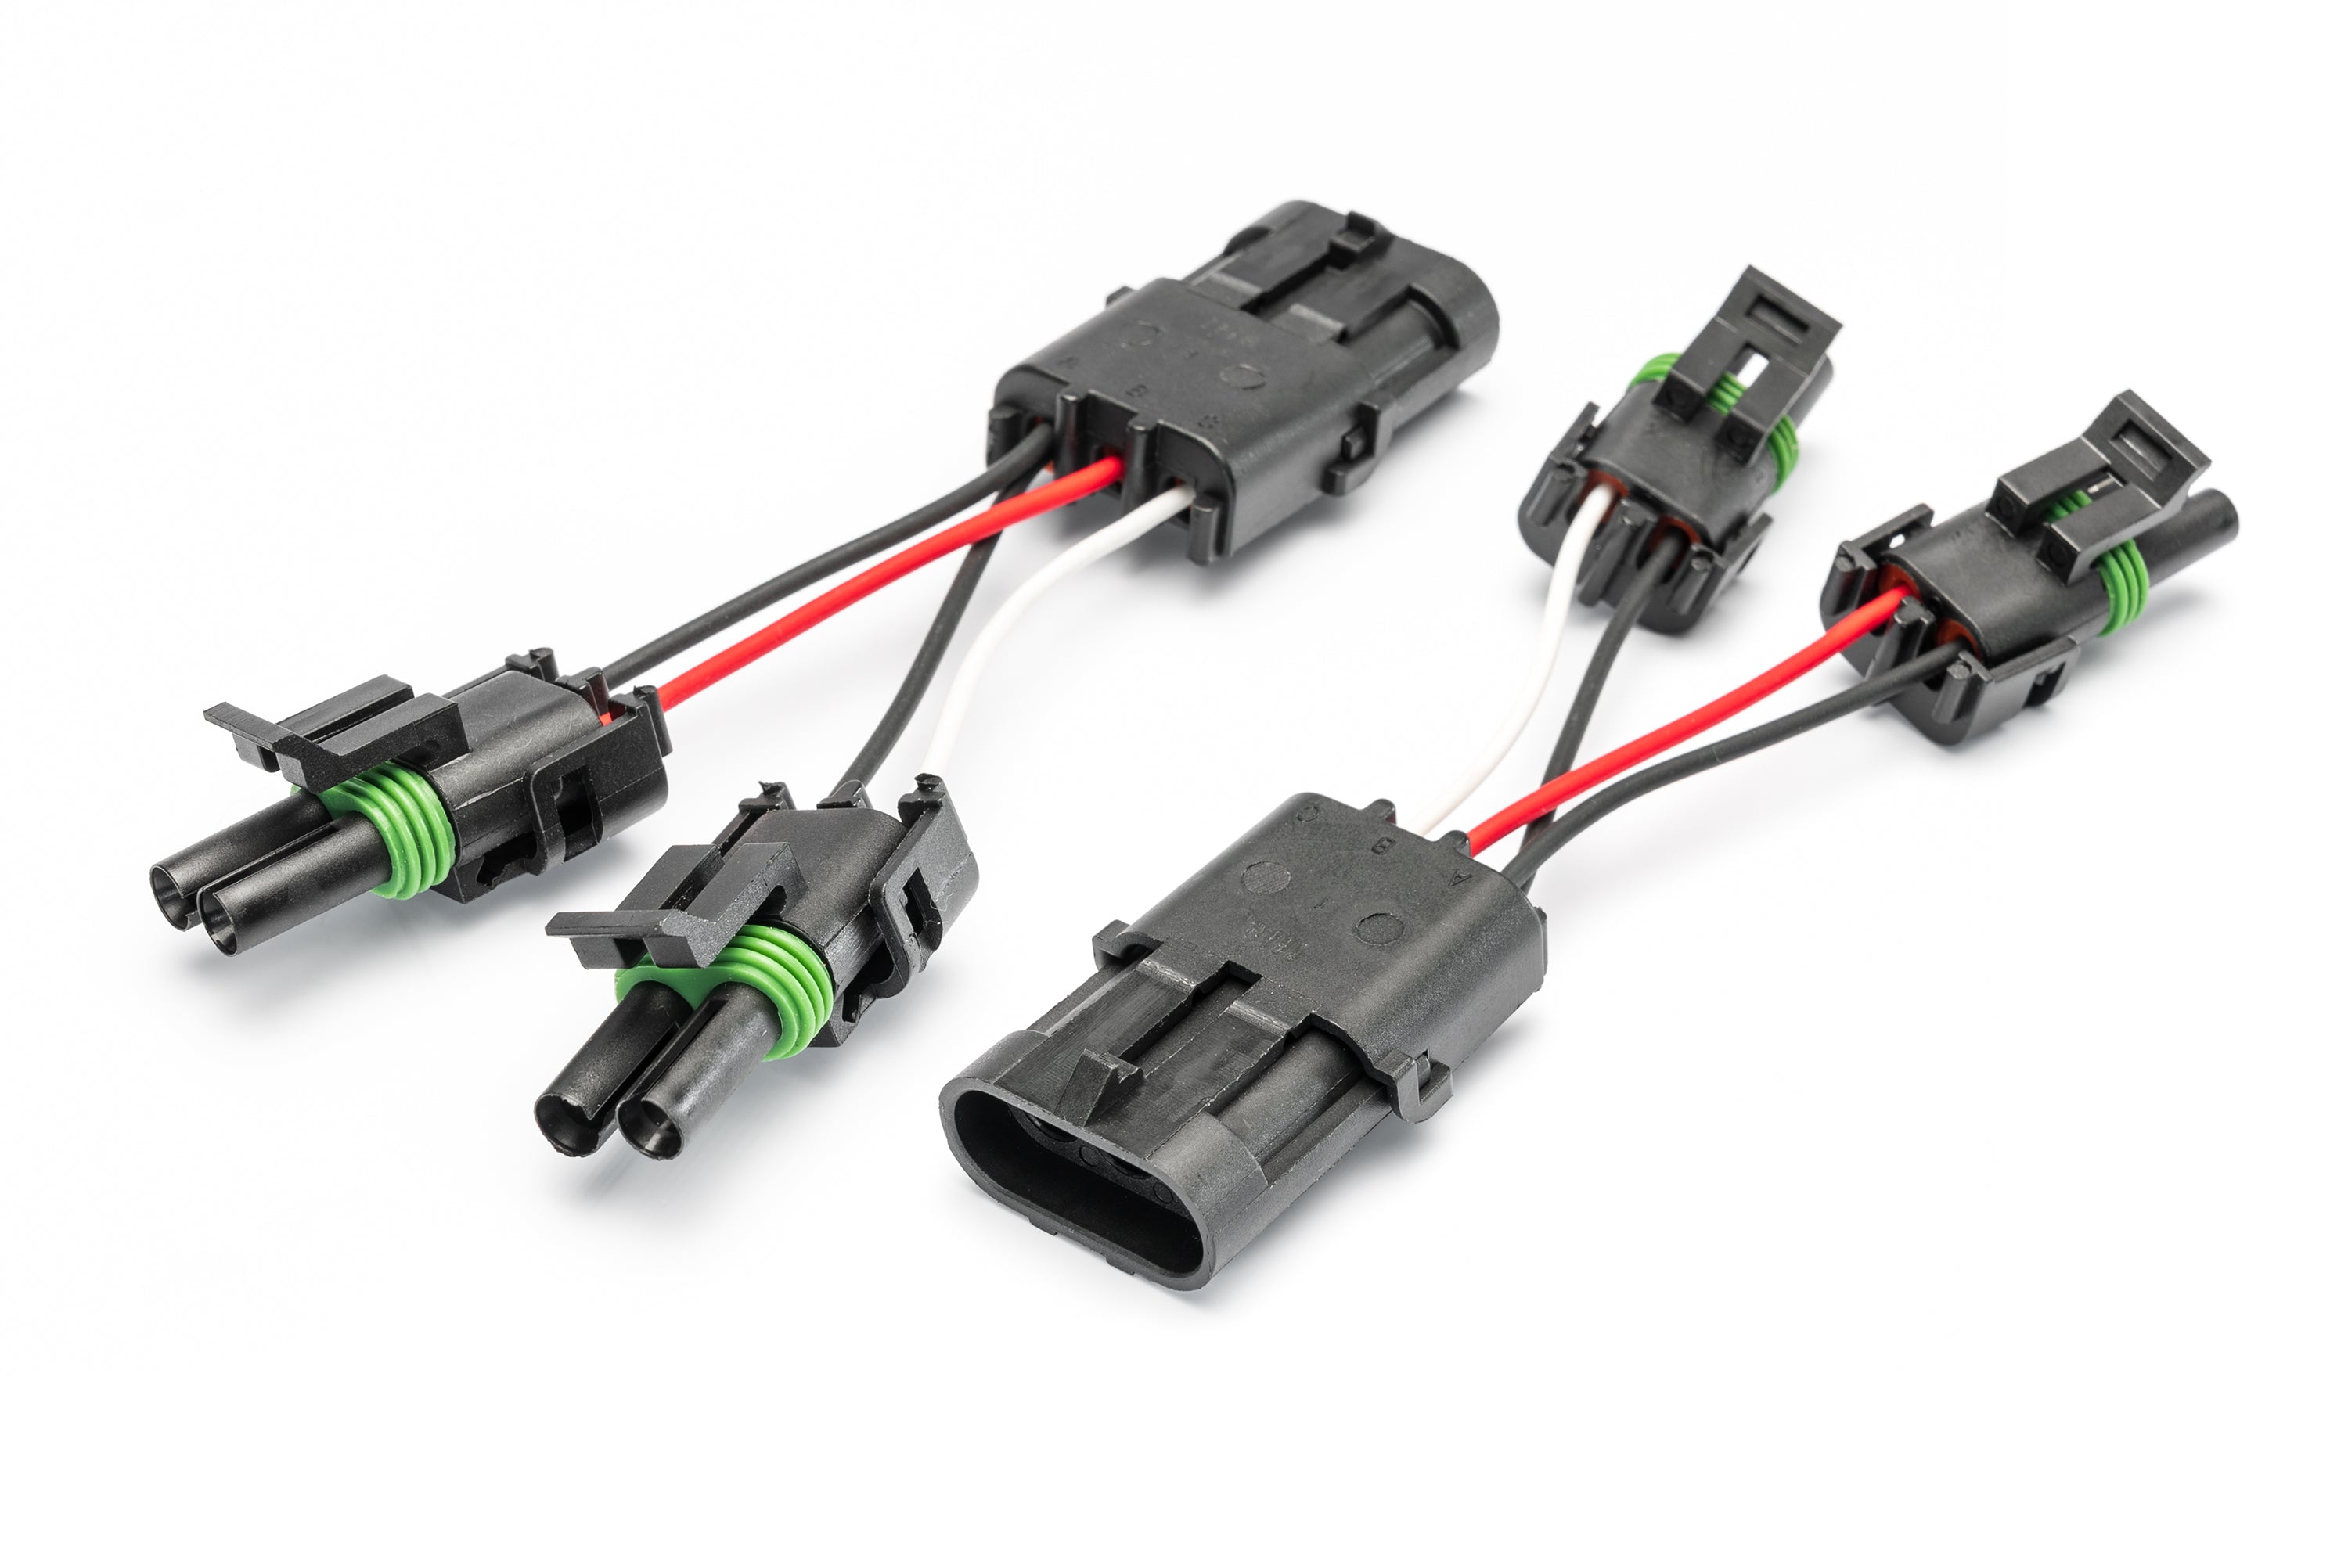 SPV Parts Harness 2-way WP Connector CROSSOVER Adapter SPLITTERS (Pair) - SPV Harness System (Works with MANY vehicles, See Details)